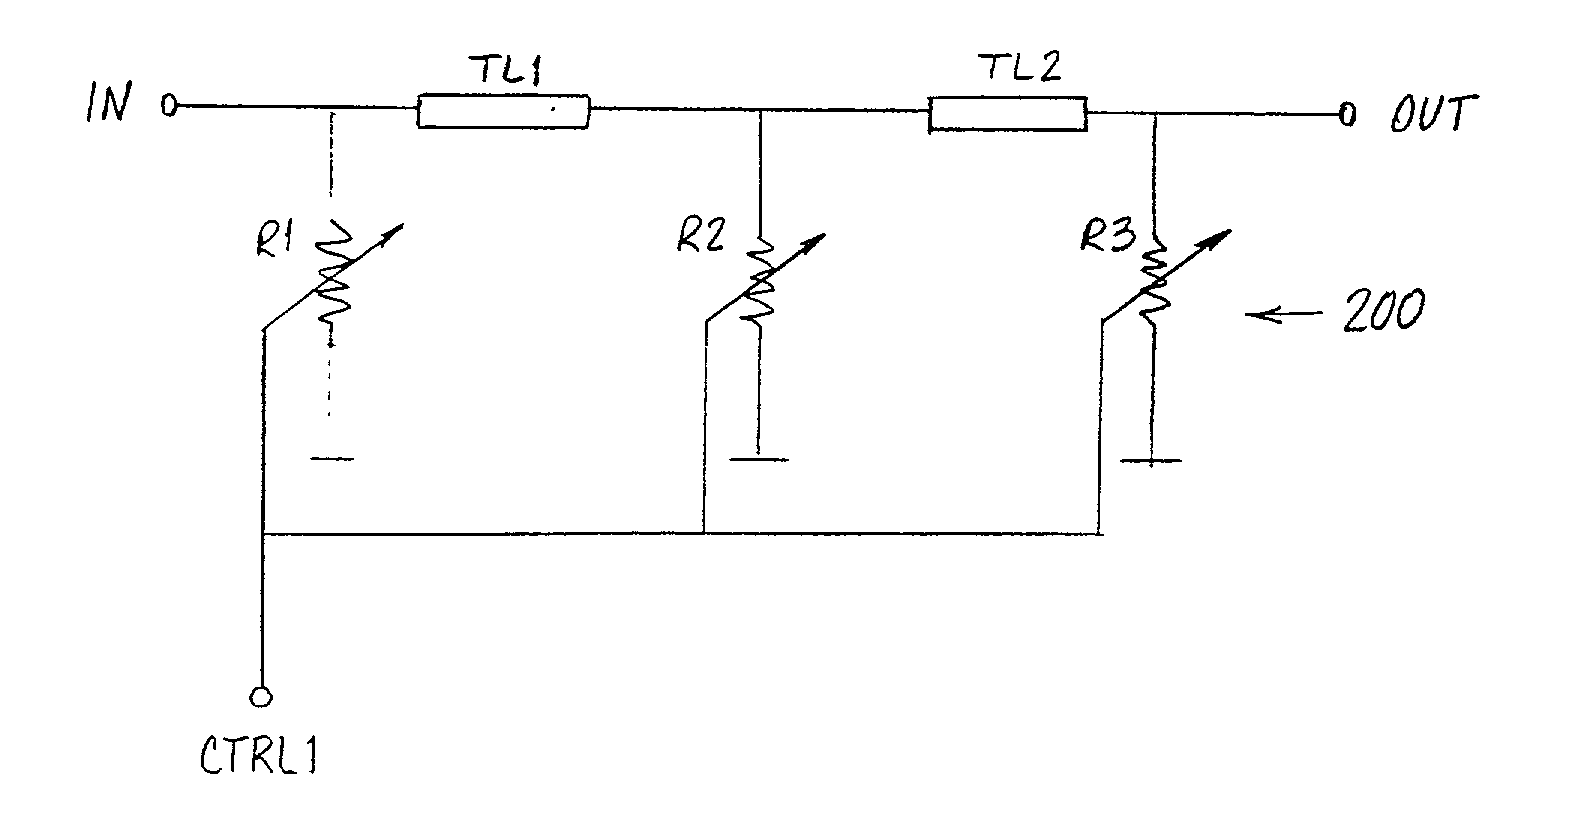 Circuit topology for attenuator and switch circuits